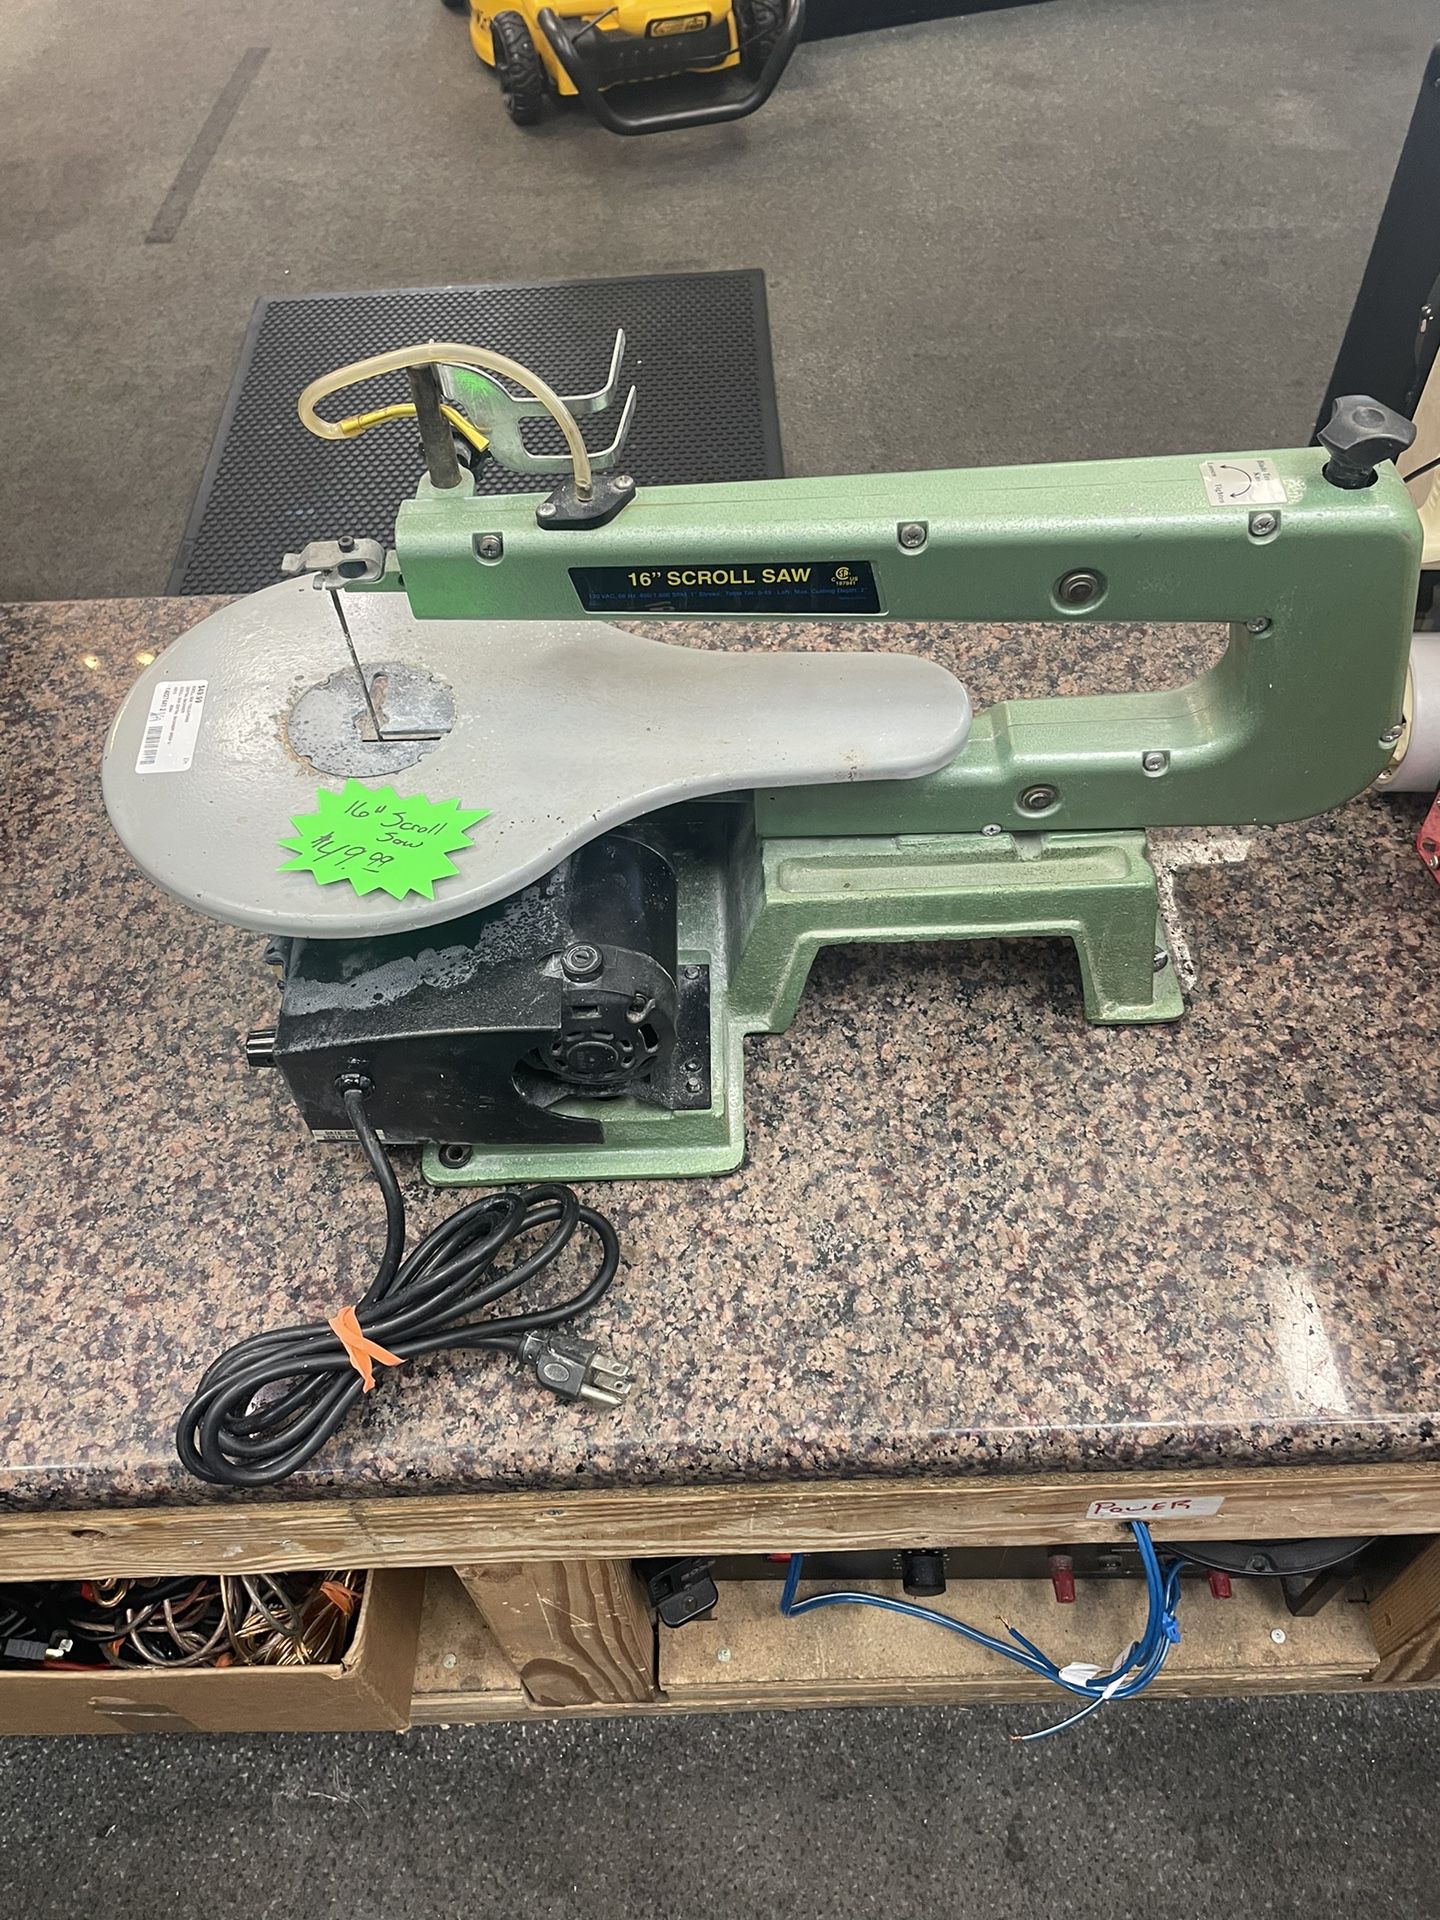 Central Machinery 16” Scroll Saw. 